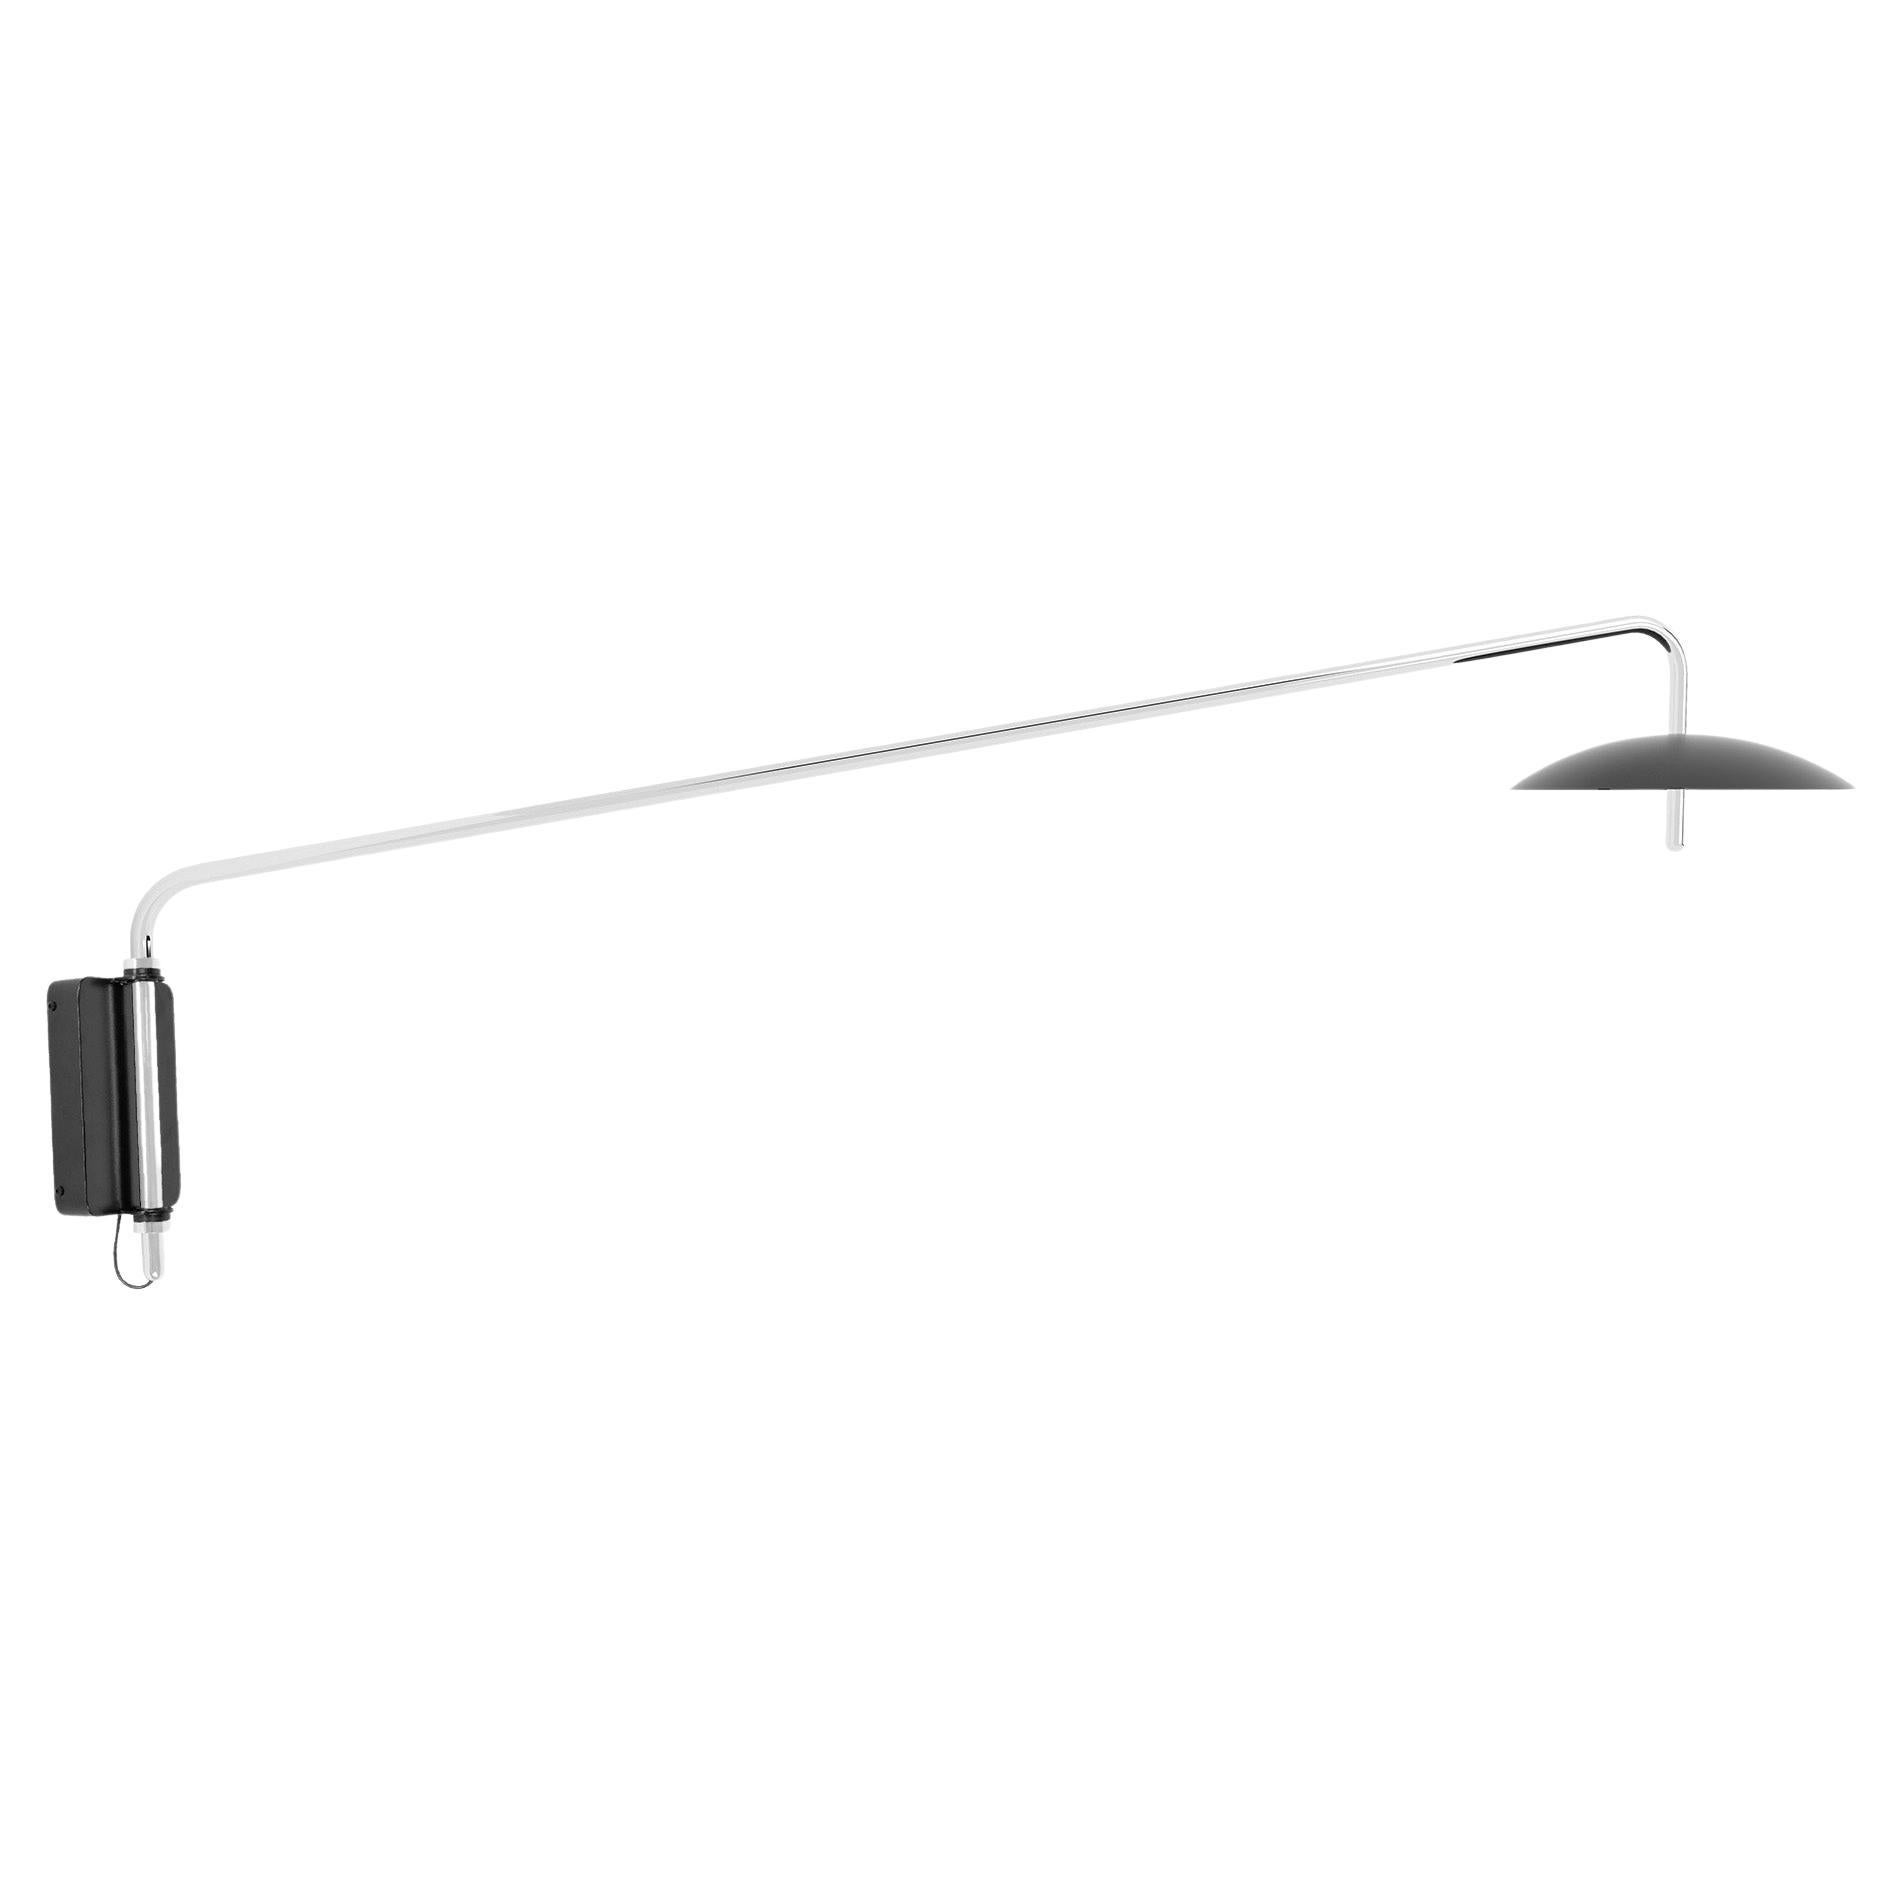 Signal Arm Sconce in Black X Nickel, Long, Hardwire, by Souda, Made to Order For Sale